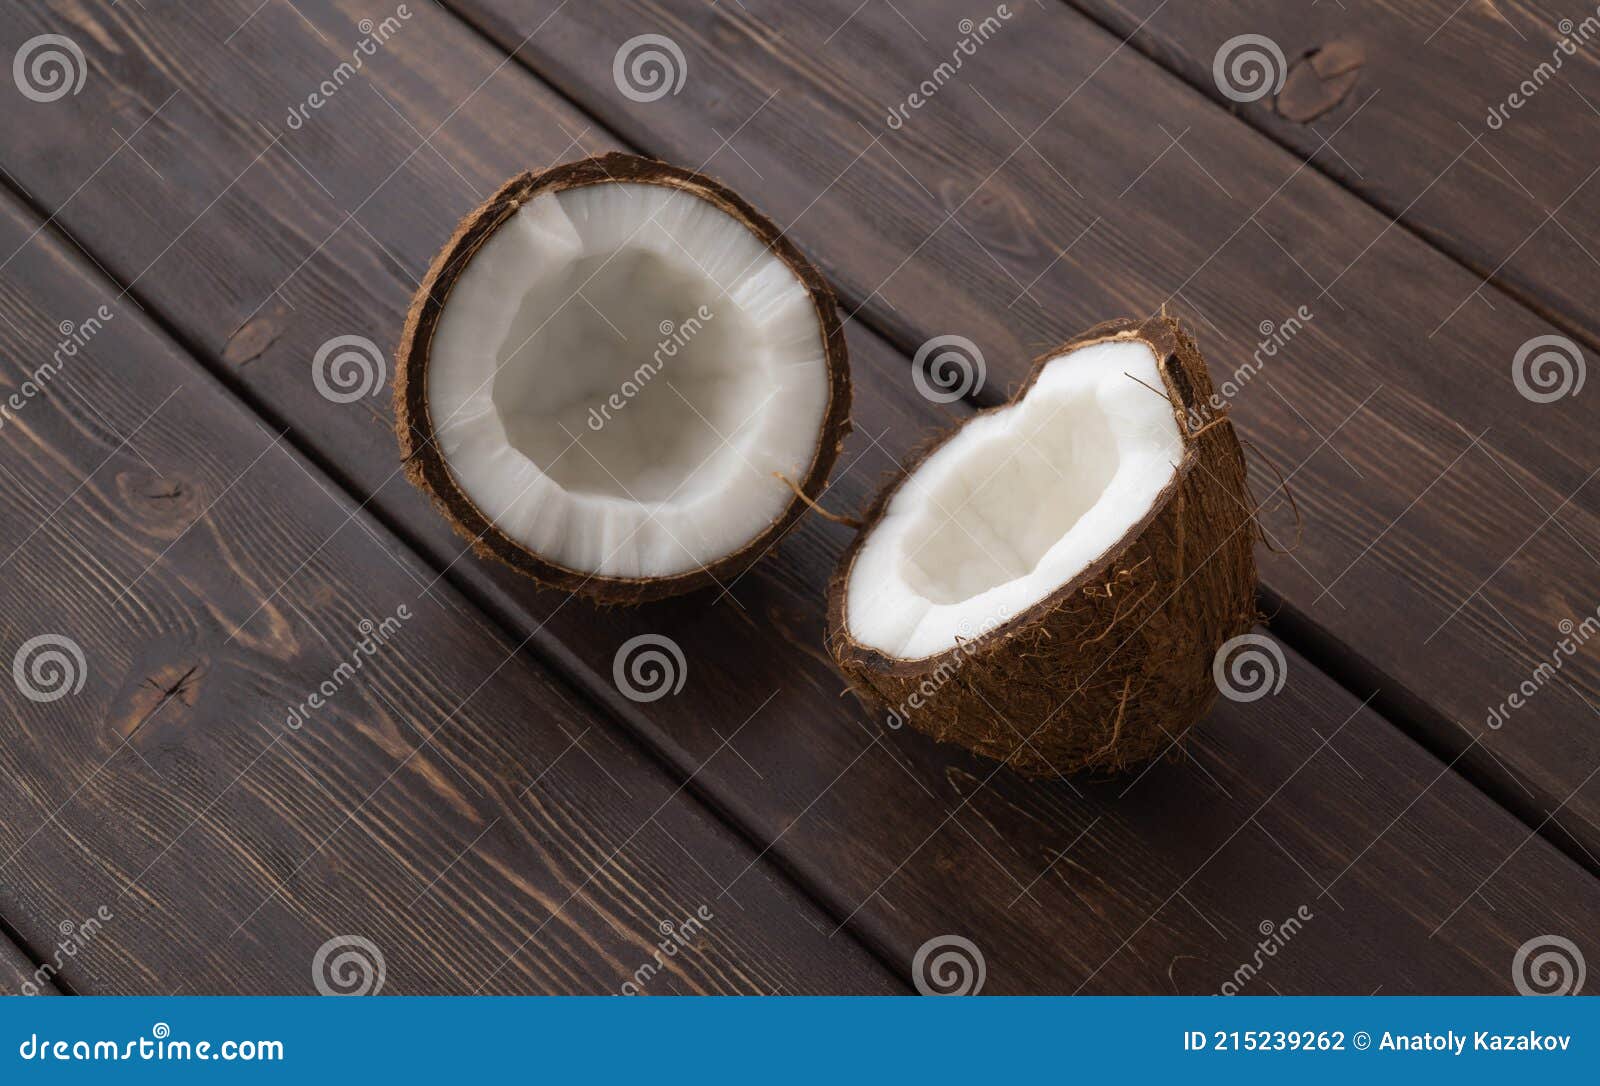 Split Coconut on Wooden Planks. Coco, Ripe Palm Fruit. Outside of the ...